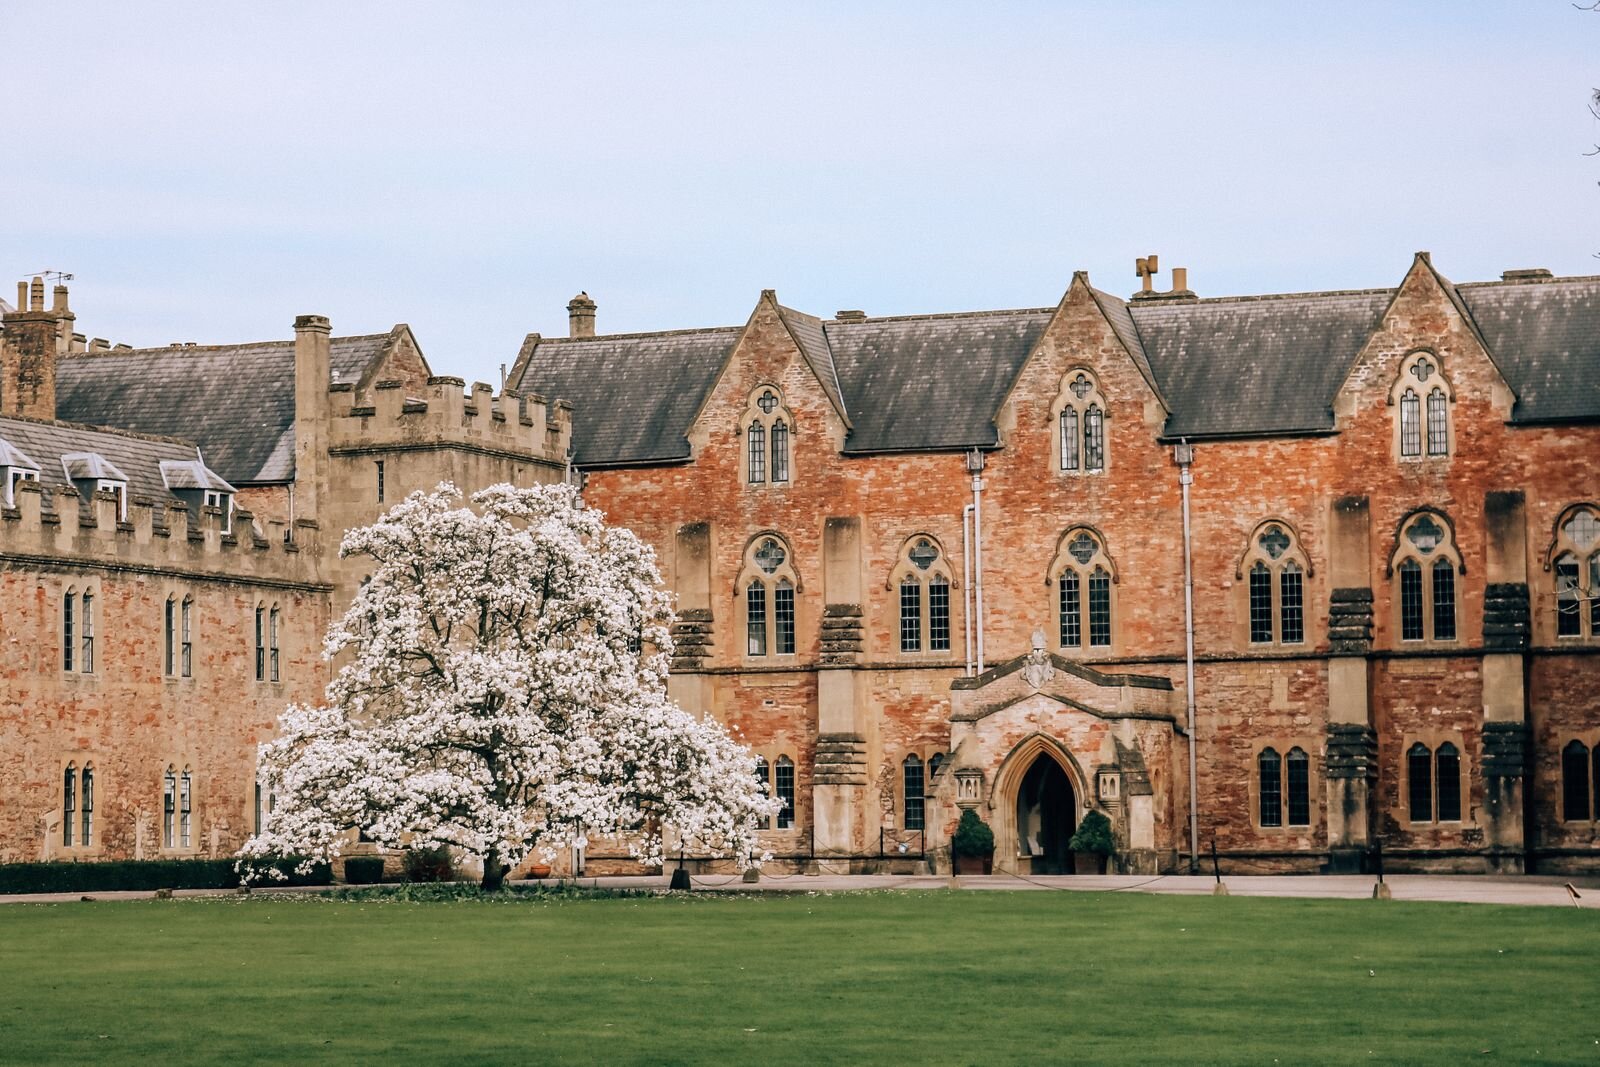 A large red brick building with ornate windows and large doorway at the front. A white blossom tree is in front of it, It's the Bishops Palace in Wells, Somerset